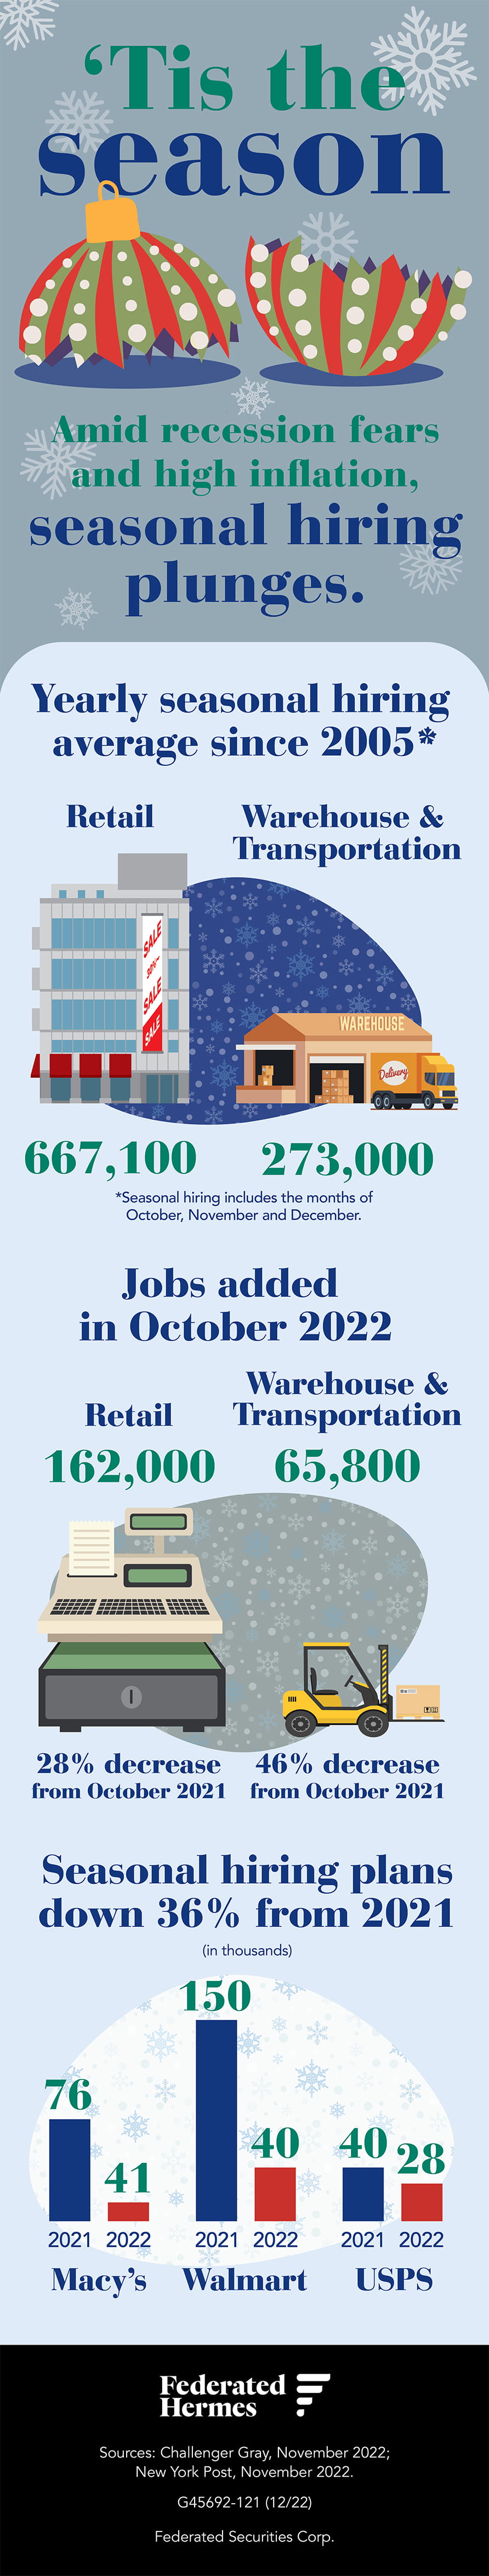 ‘Tis the season. Amid recession fears and high inflation, seasonal hiring plunges. Yearly seasonal hiring average since 2005. Note: *Seasonal hiring includes the months of October, November, and December. The yearly seasonal hiring average in retail was 667,100. The yearly seasonal hiring average in warehouse and transportation was 273,000. Jobs added in October 2022. 162,000 jobs in retail, a 28% decrease from October 2021. 65,800 jobs in warehouse and transportation, a 46% decrease from October 2021. Seasonal hiring plans down 36% from 2021. For Macy’s, from 76,000 in 2021 to 41,000 in 2022. For Walmart, from 150,000 in 2021 to 40,000 in 2022. For USPS, from 40,000 in 2021 to 28,000 in 2022. Information sources: Challenger Gray, November 2022; New York Post, November 2022.